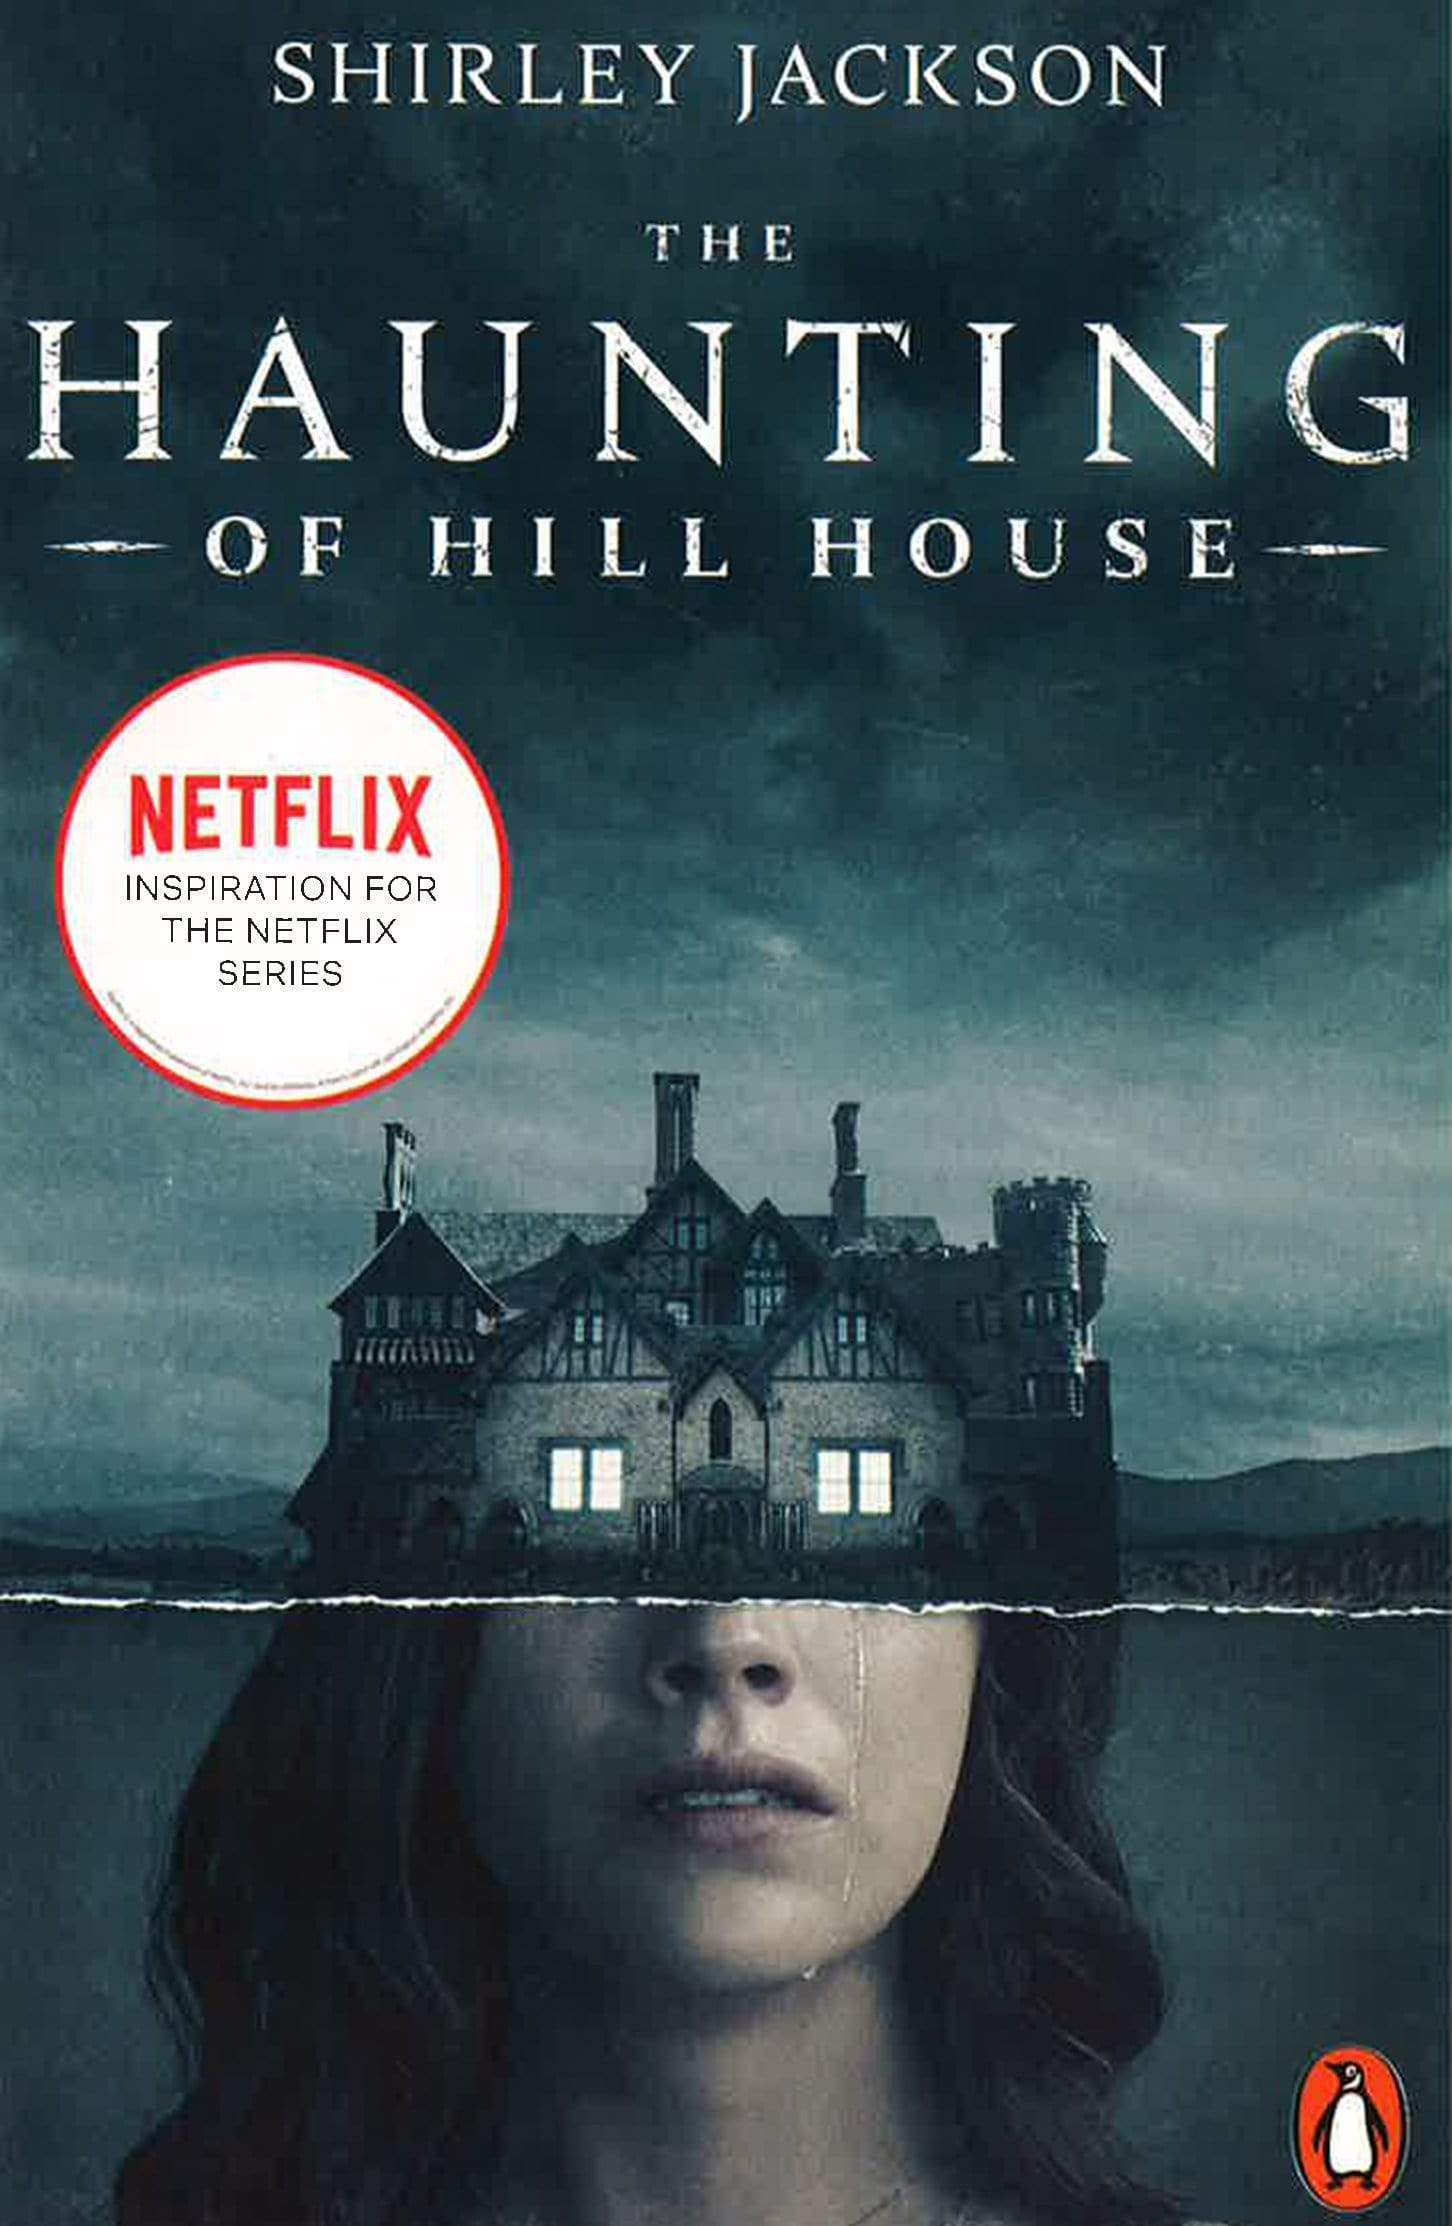 The Haunting Of Hill House: Now The Inspiration For A New Netflix Original Series